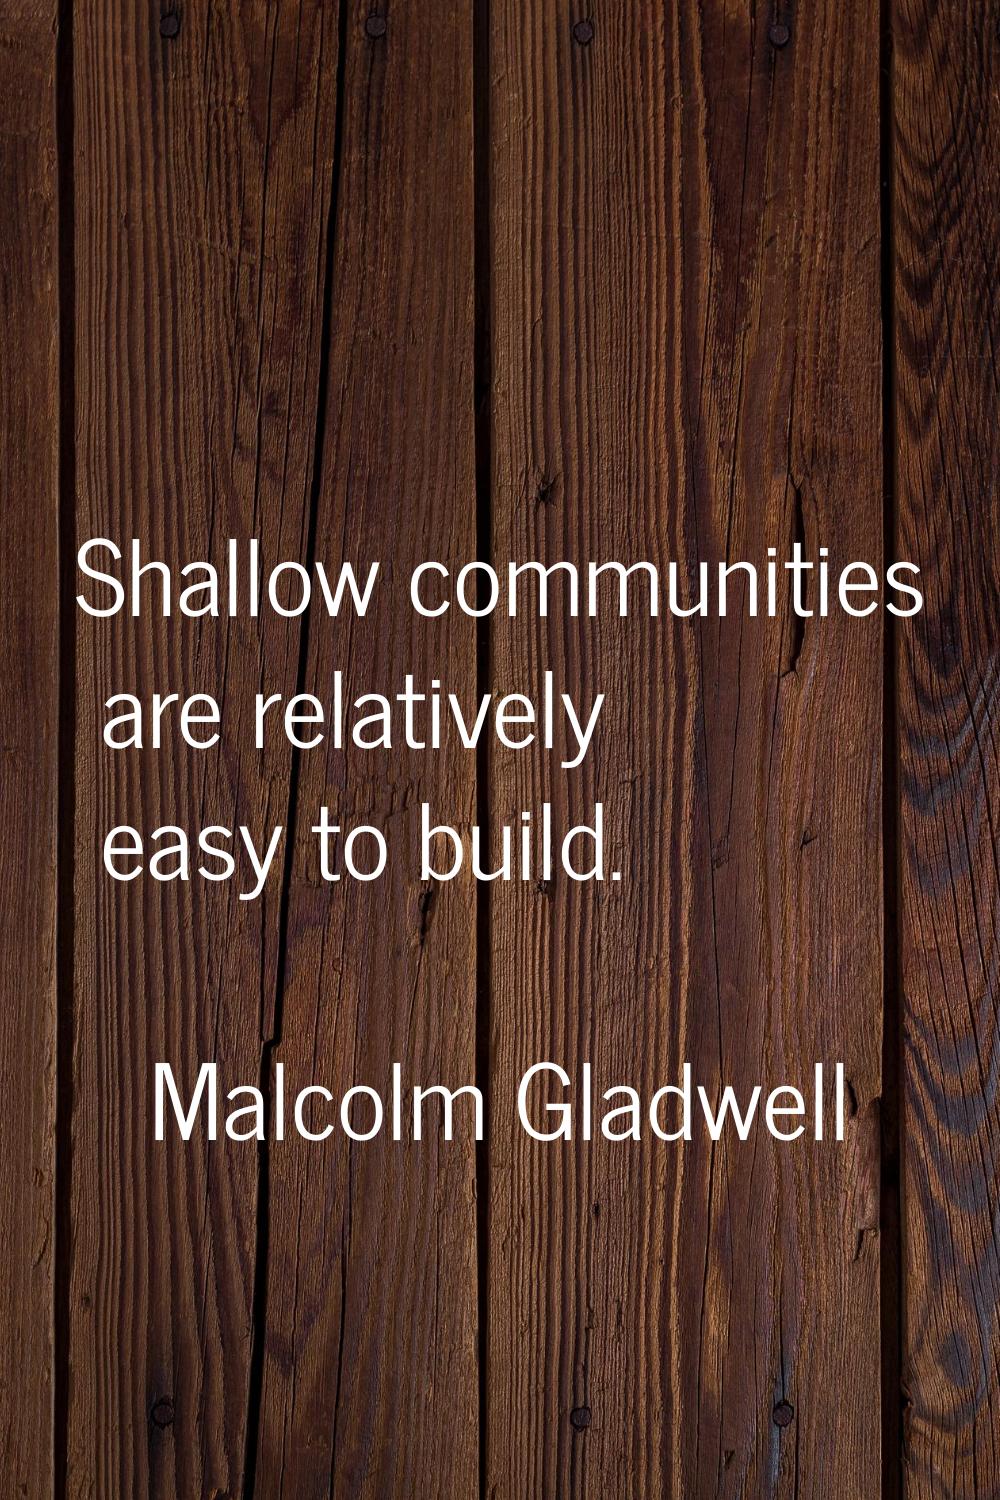 Shallow communities are relatively easy to build.